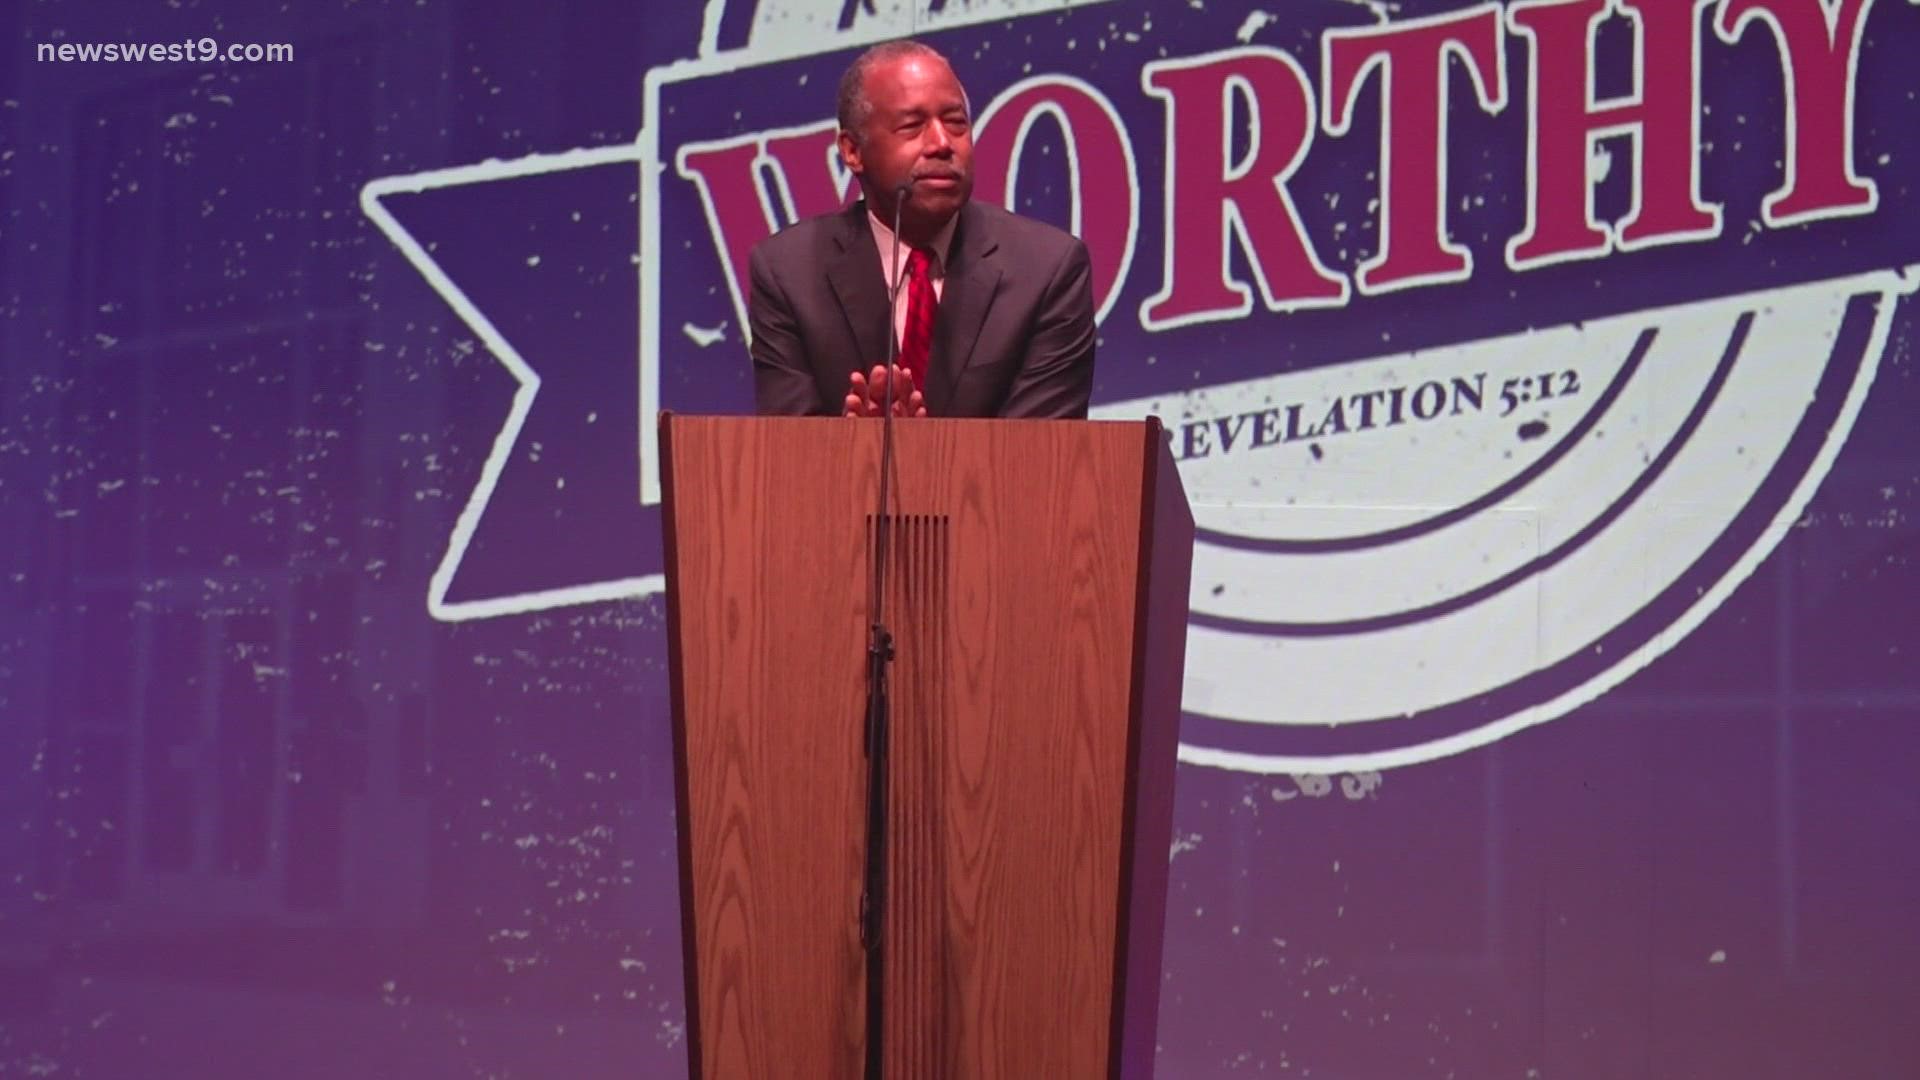 The Carsons addressed the student body and read Dr. Carson's book.